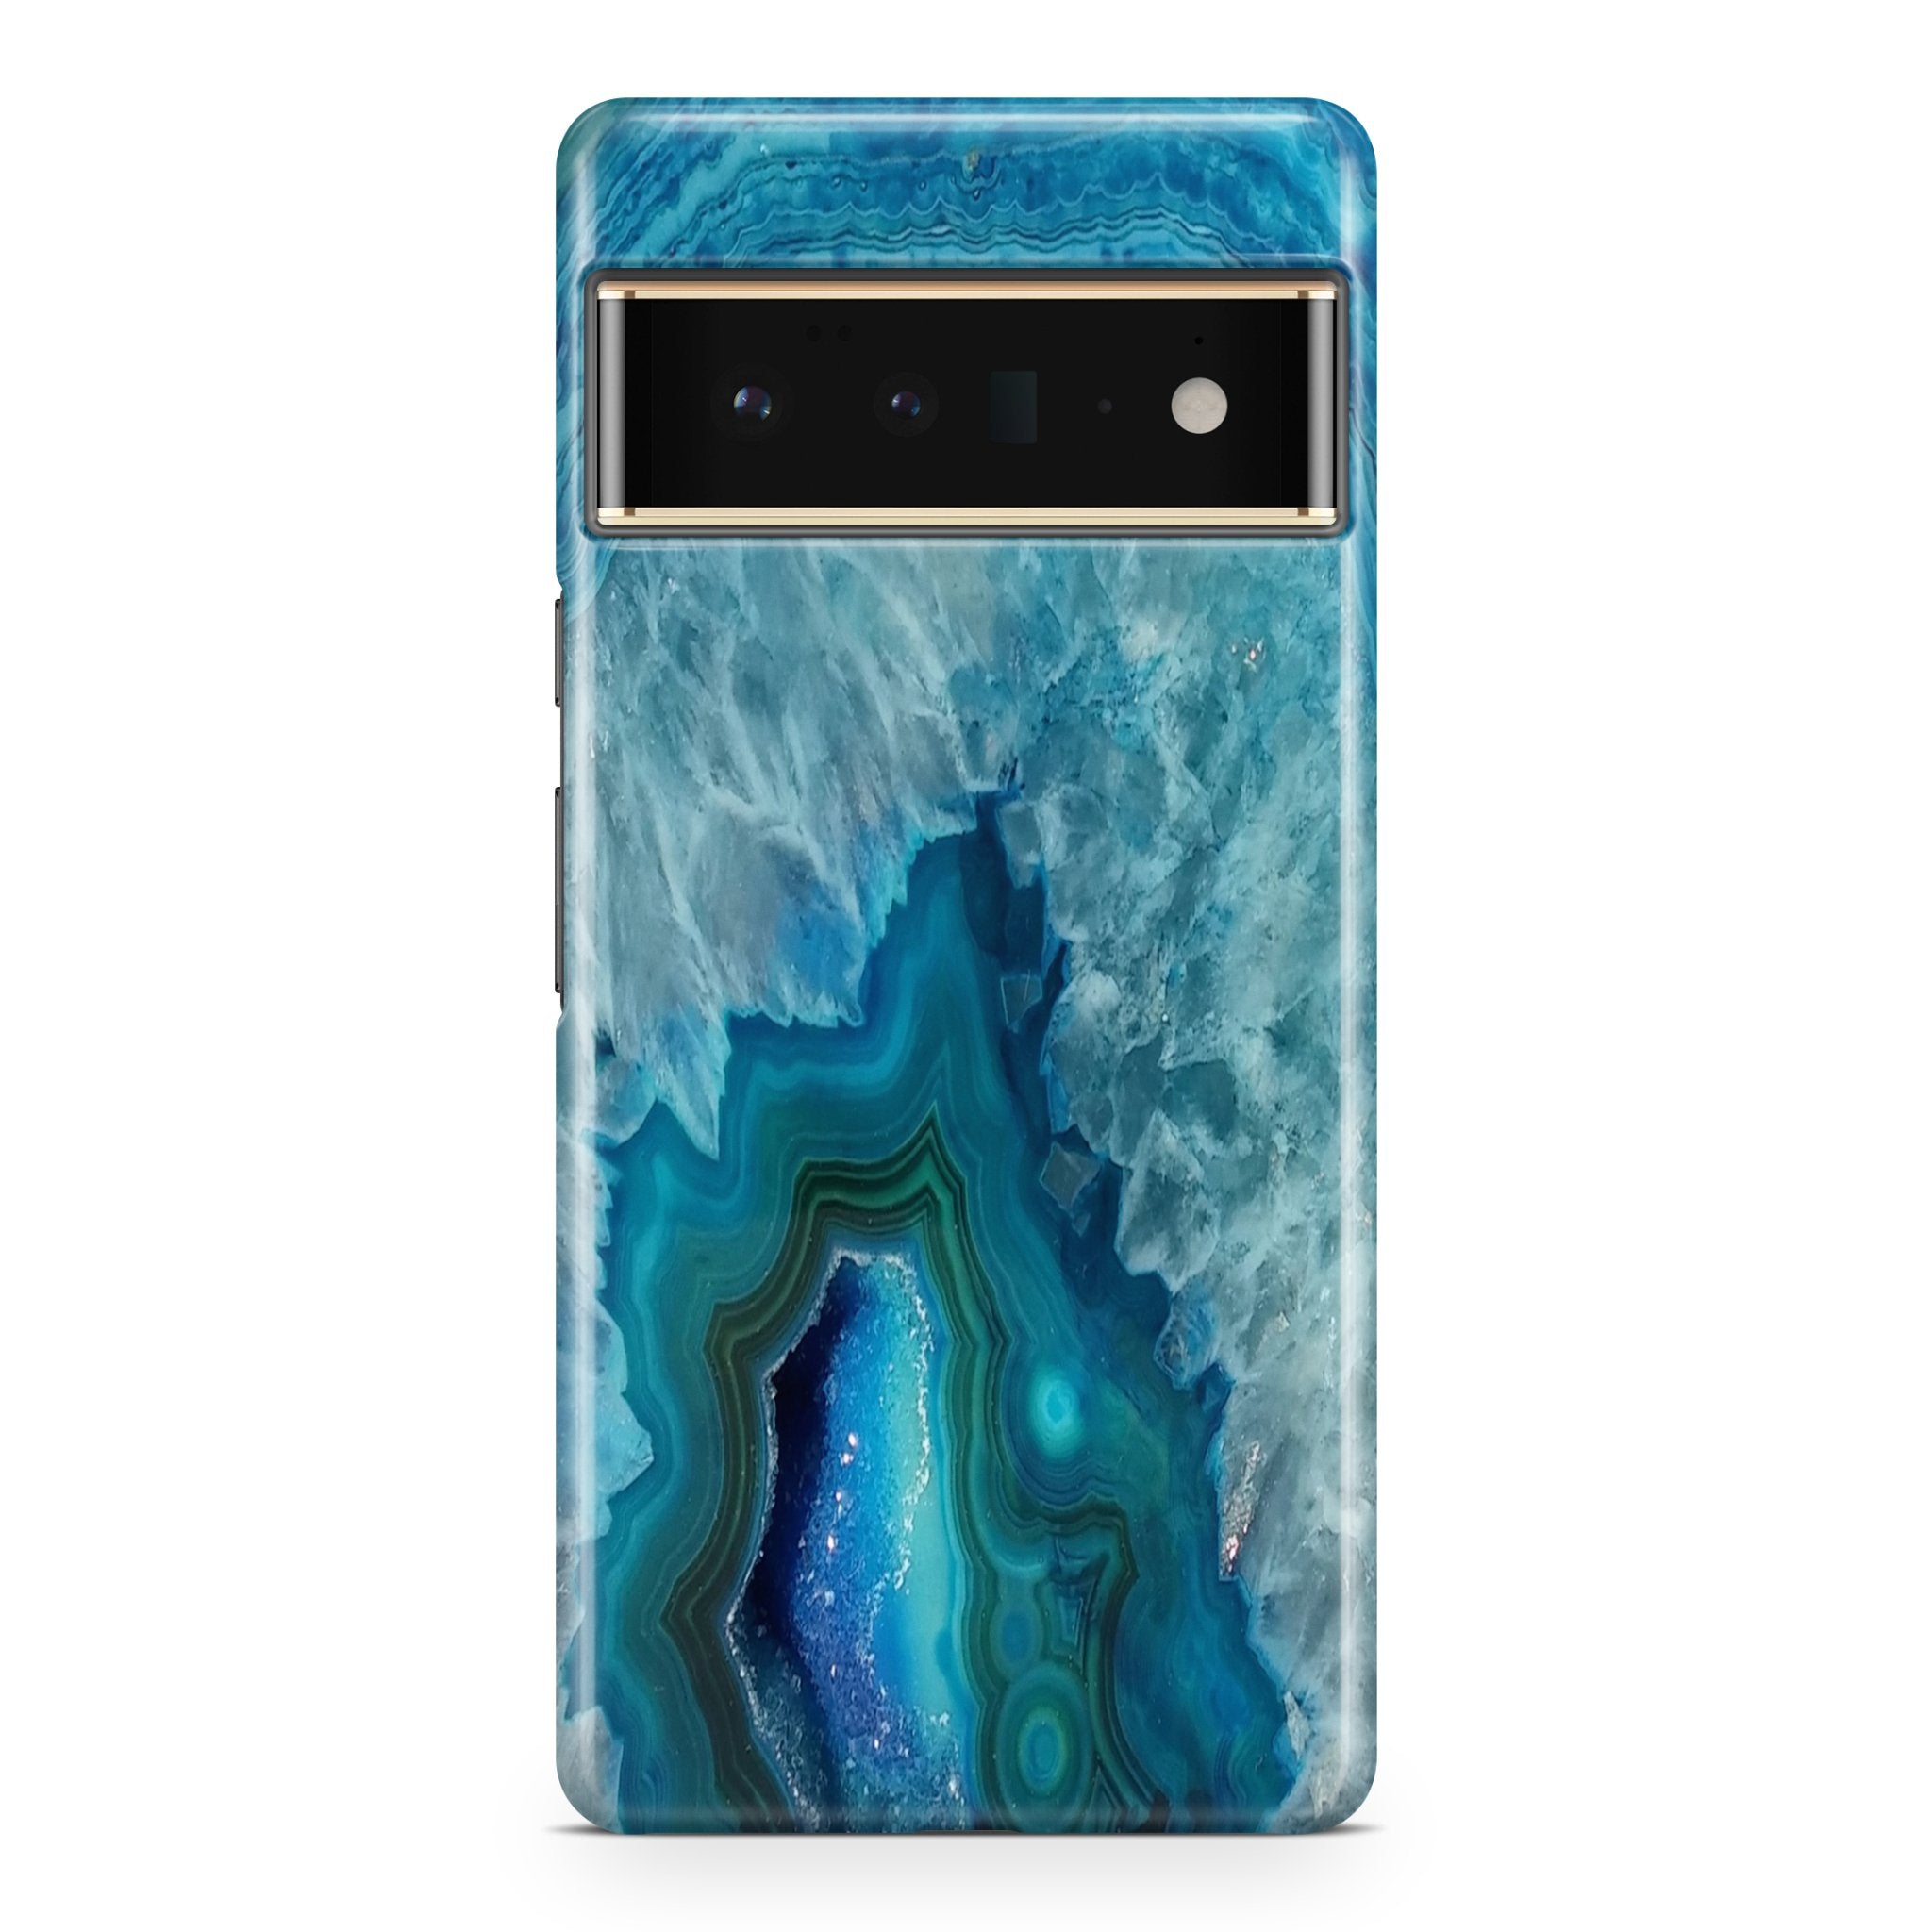 Blue Geode II - Google phone case designs by CaseSwagger